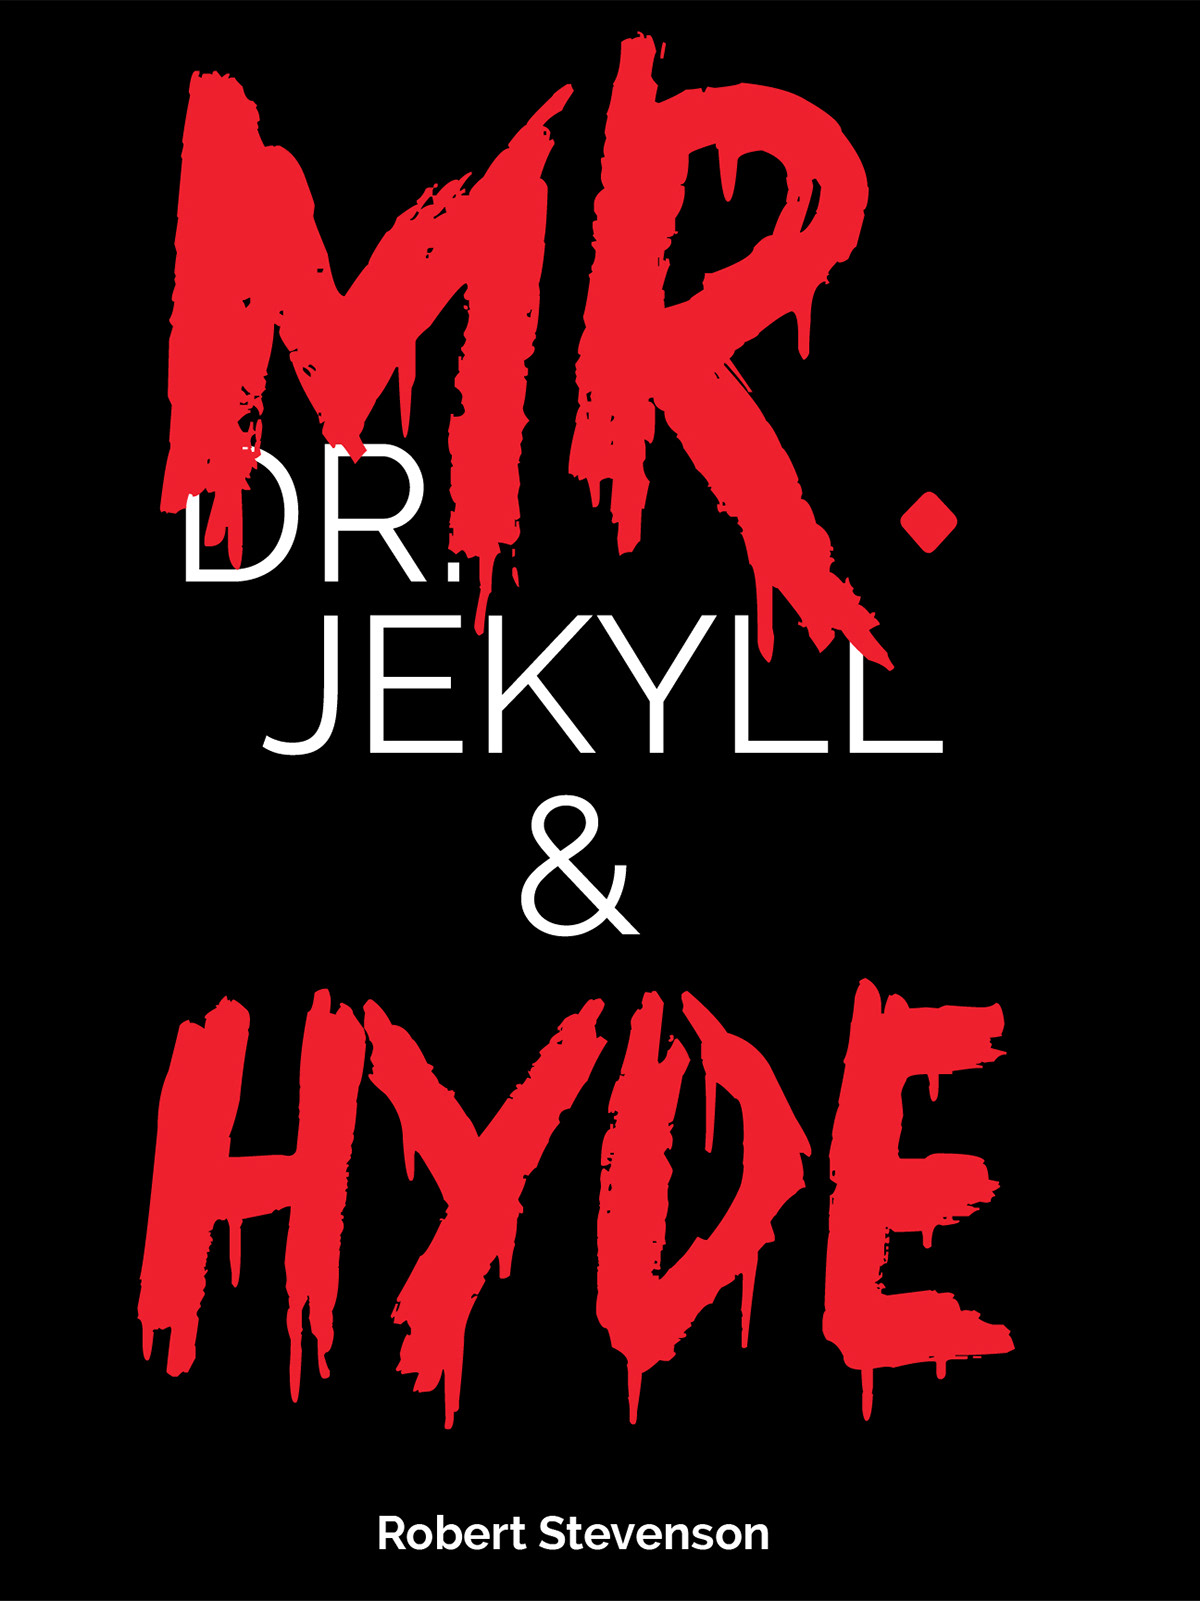 book dark type dr jekyll mr hyde book cover black White two-faced